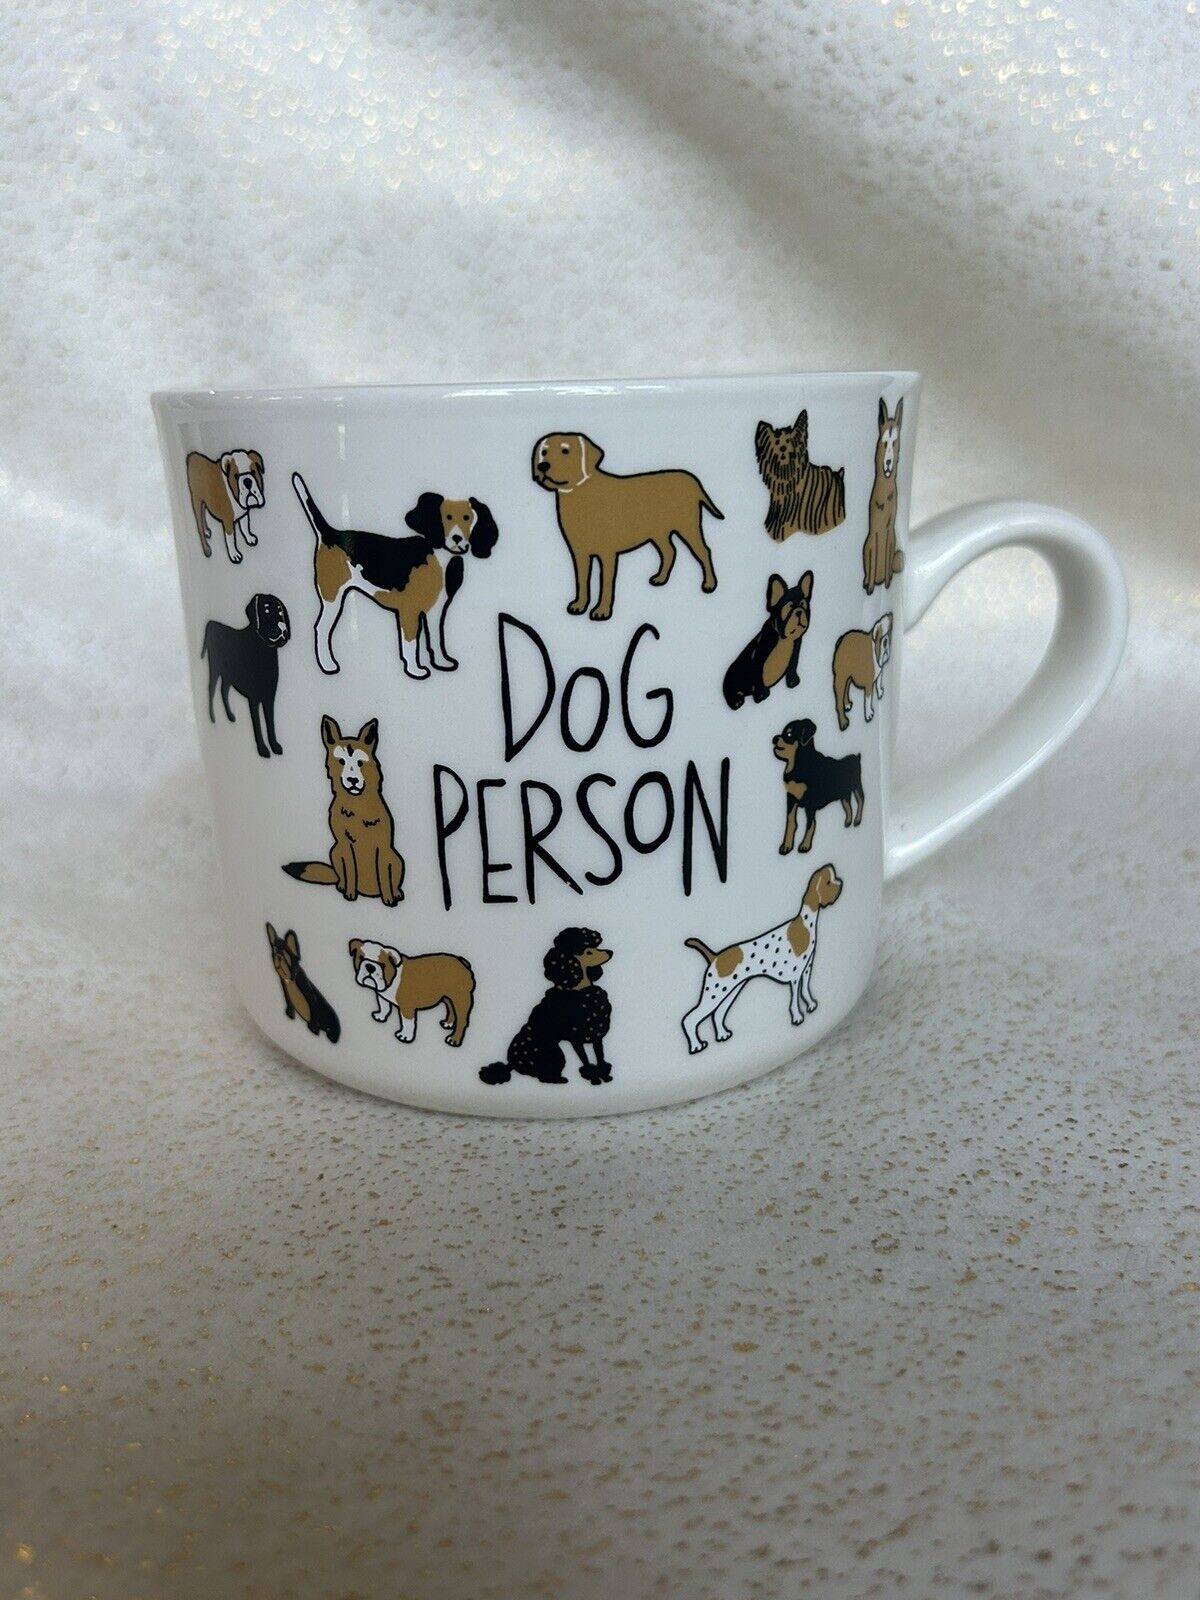 Opal House Dog Person Coffee Mug Target Stoneware 16 oz For Dog Lovers Cup